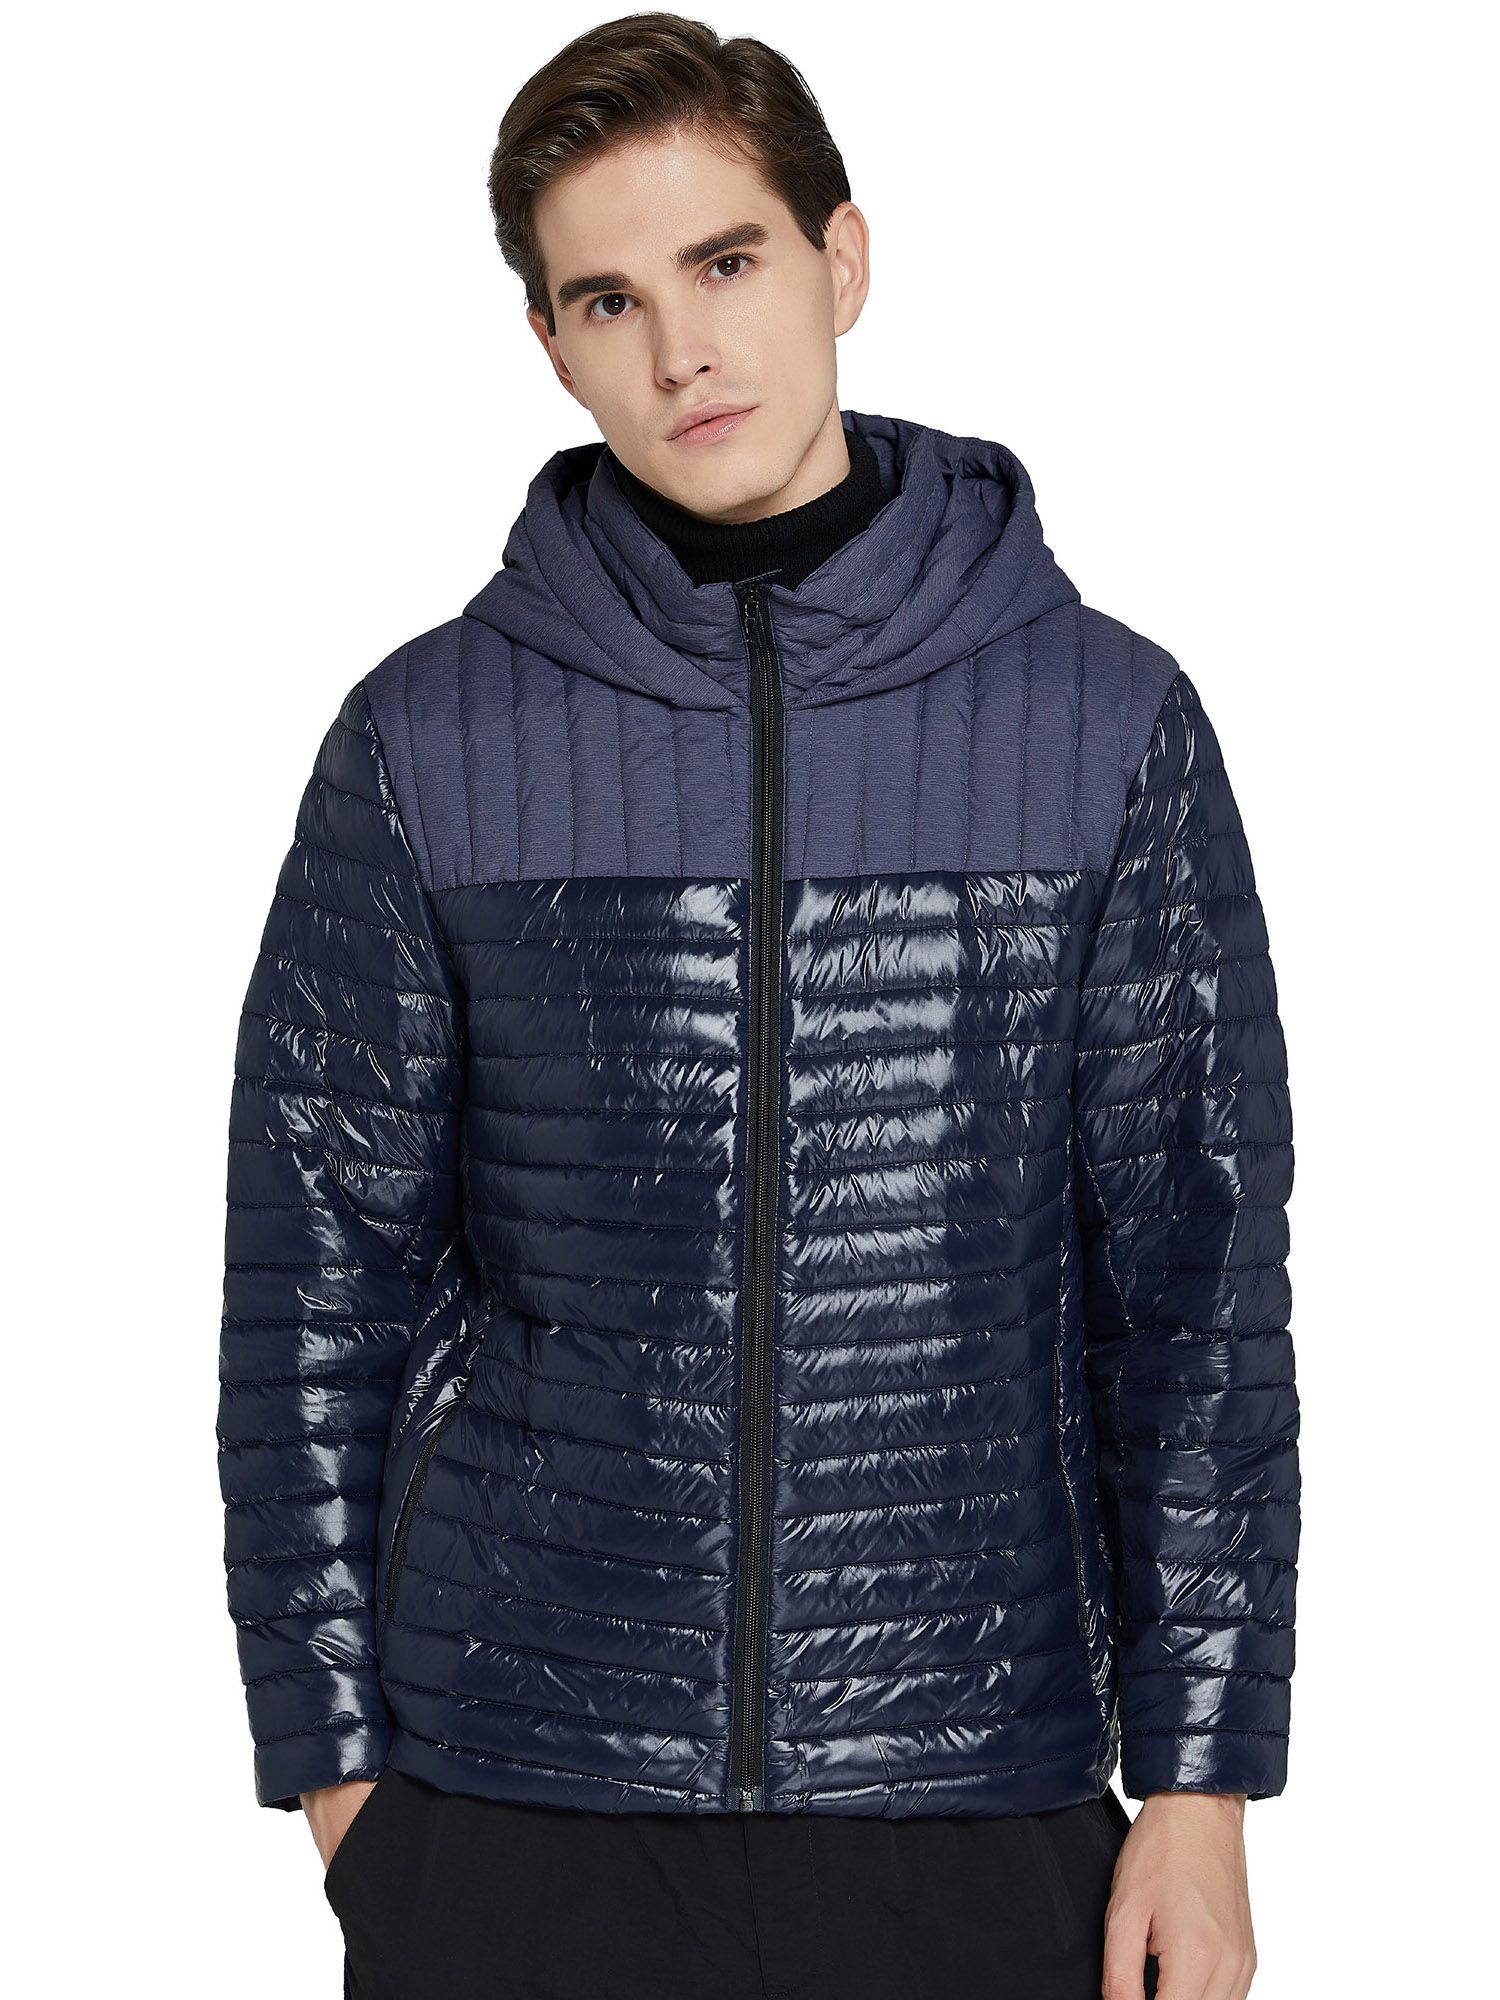 Orolay Men's Long Hooded Winter Down Jacket Warm Puffer Jacket - image 1 of 5